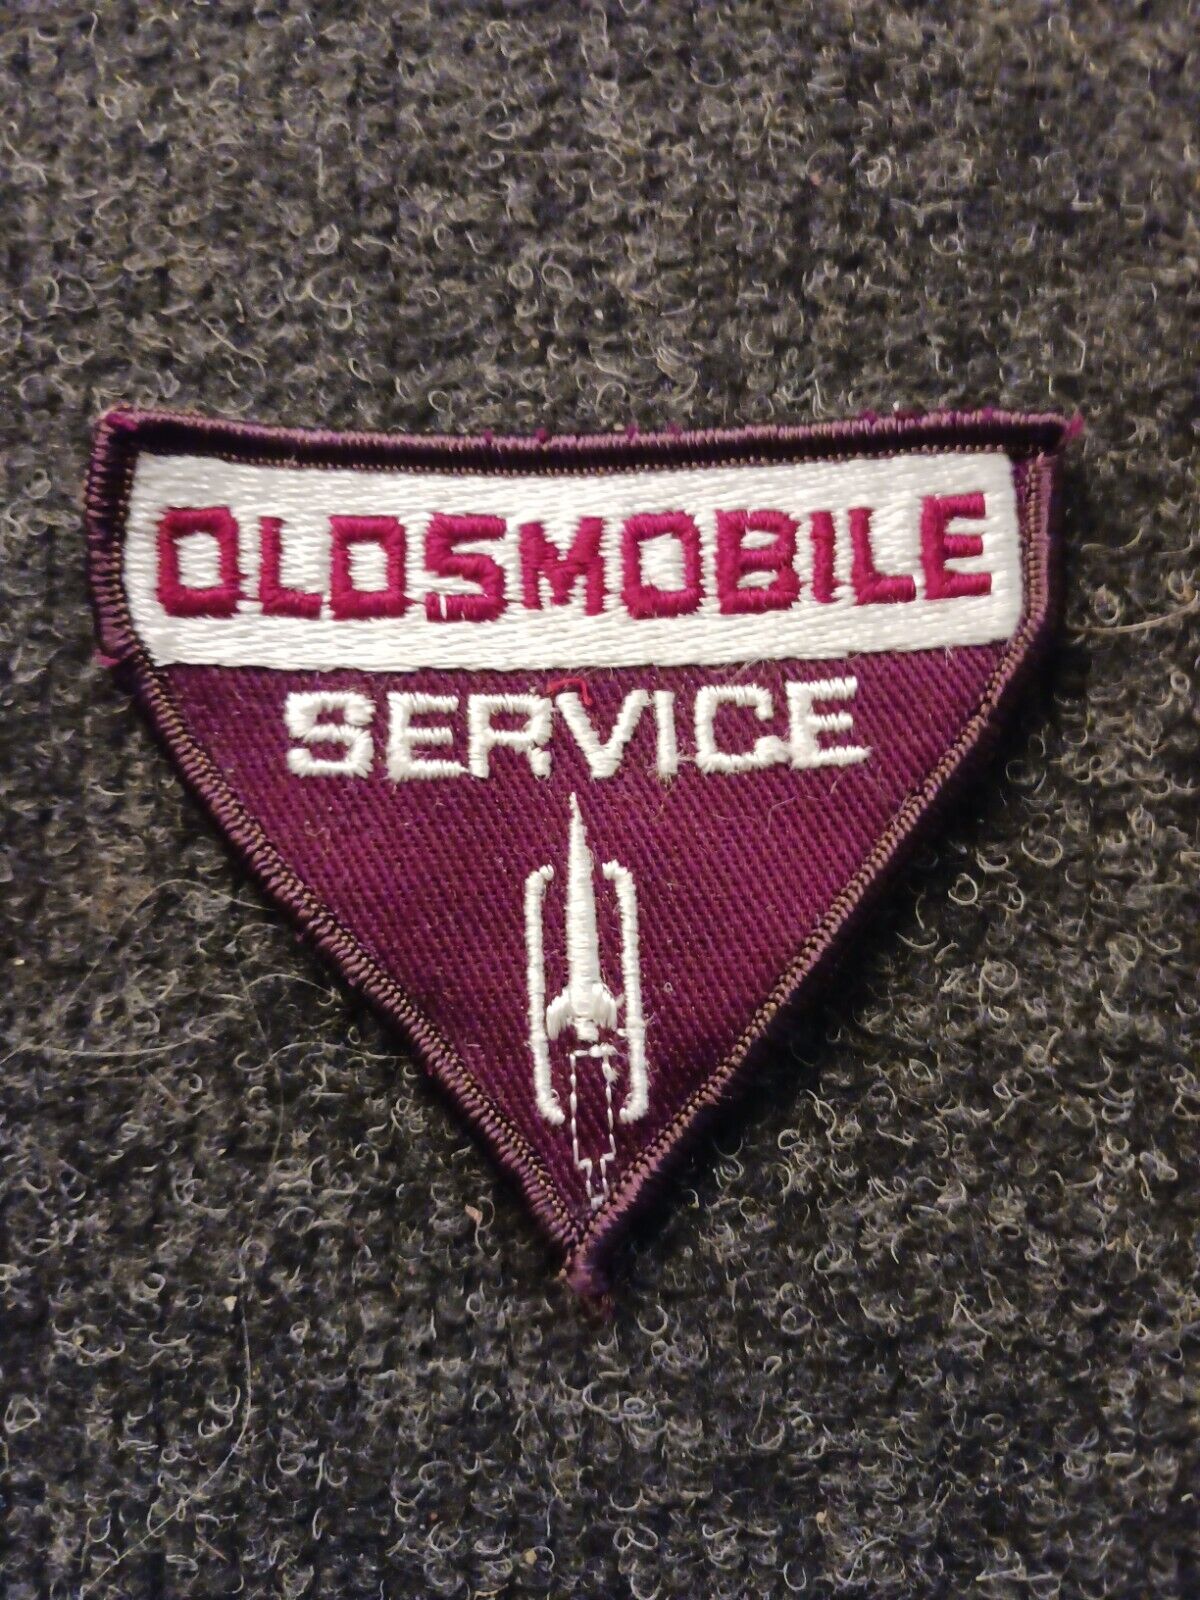 NOS, Vintage authentic 1970s Oldsmobile sew on Patch  rare . Never used